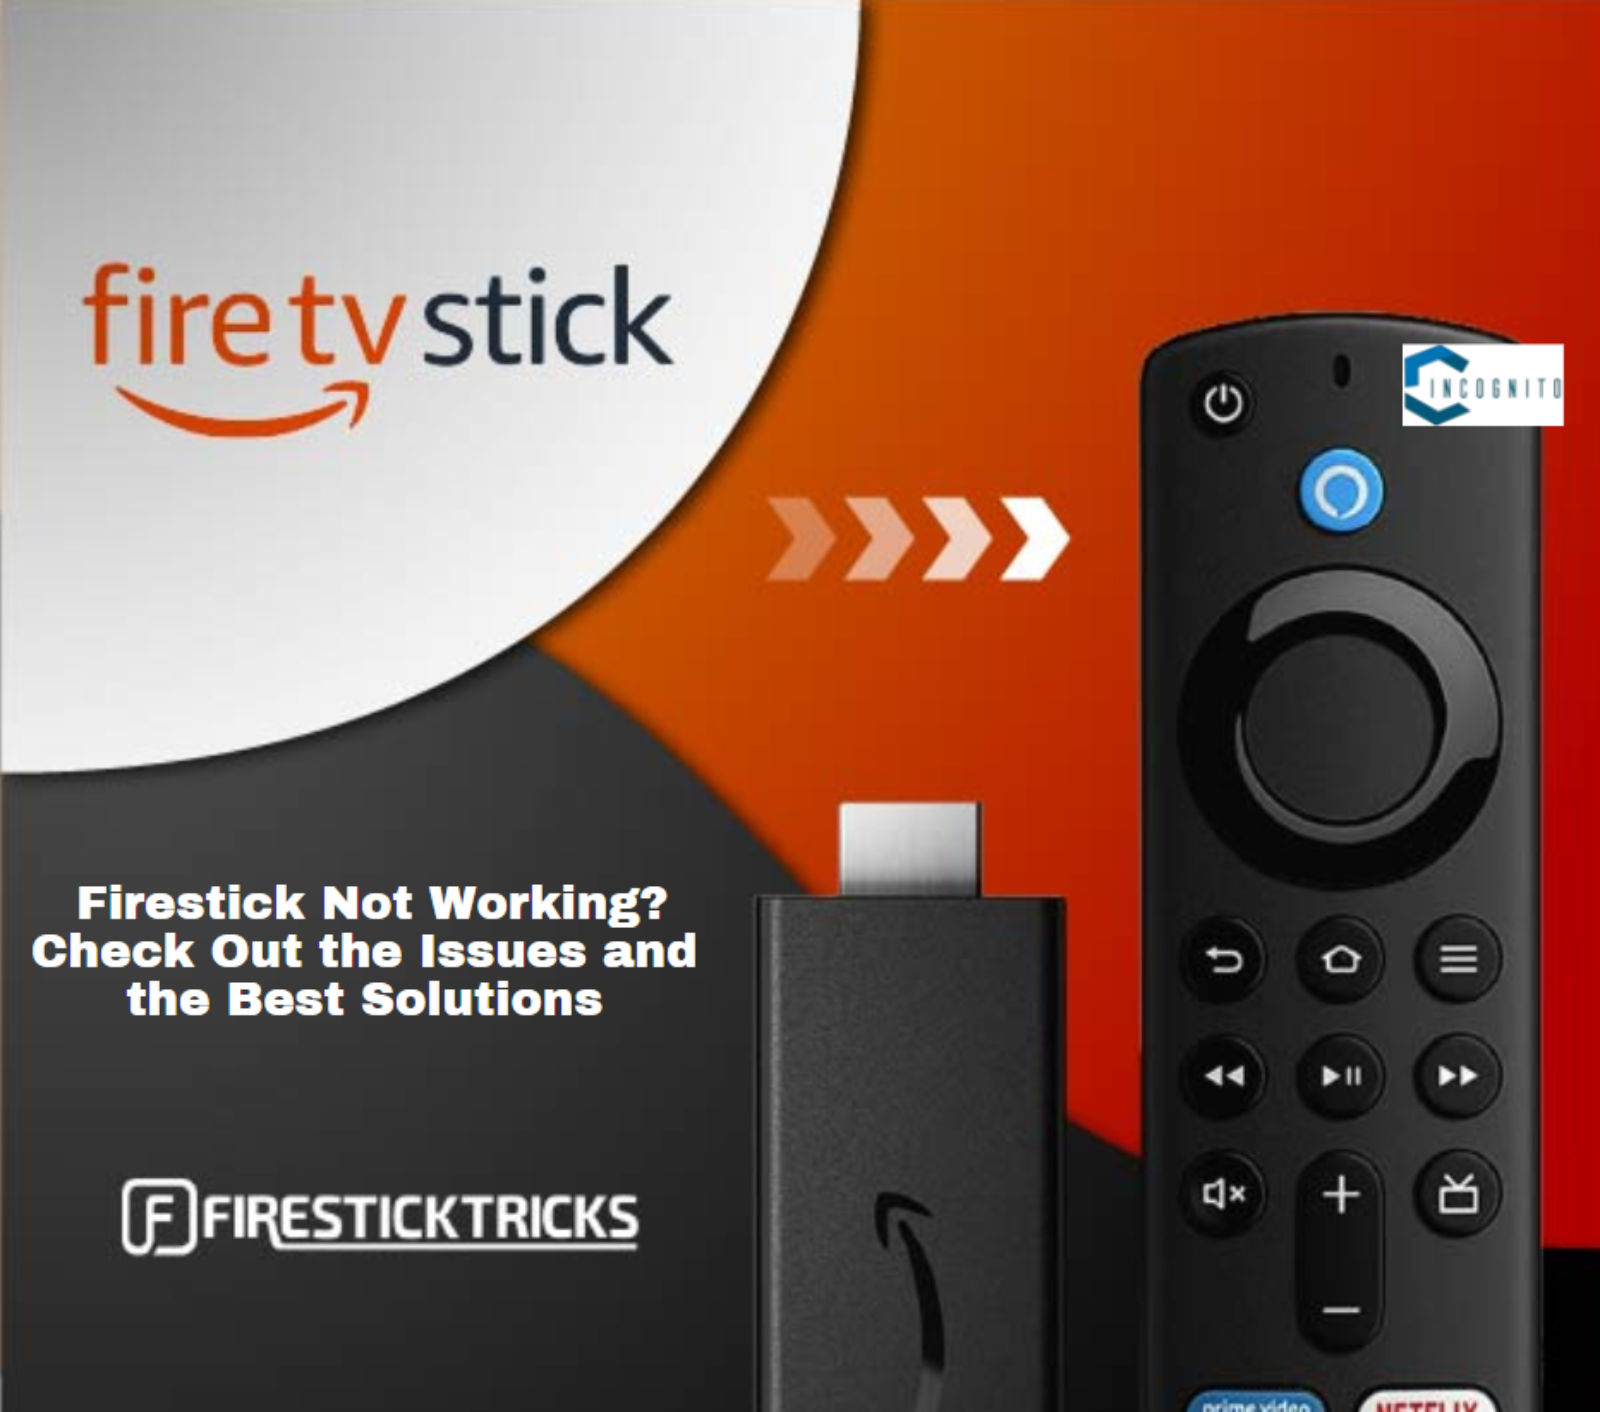 Firestick Not Working? Check Out The Issues And The Best Solutions